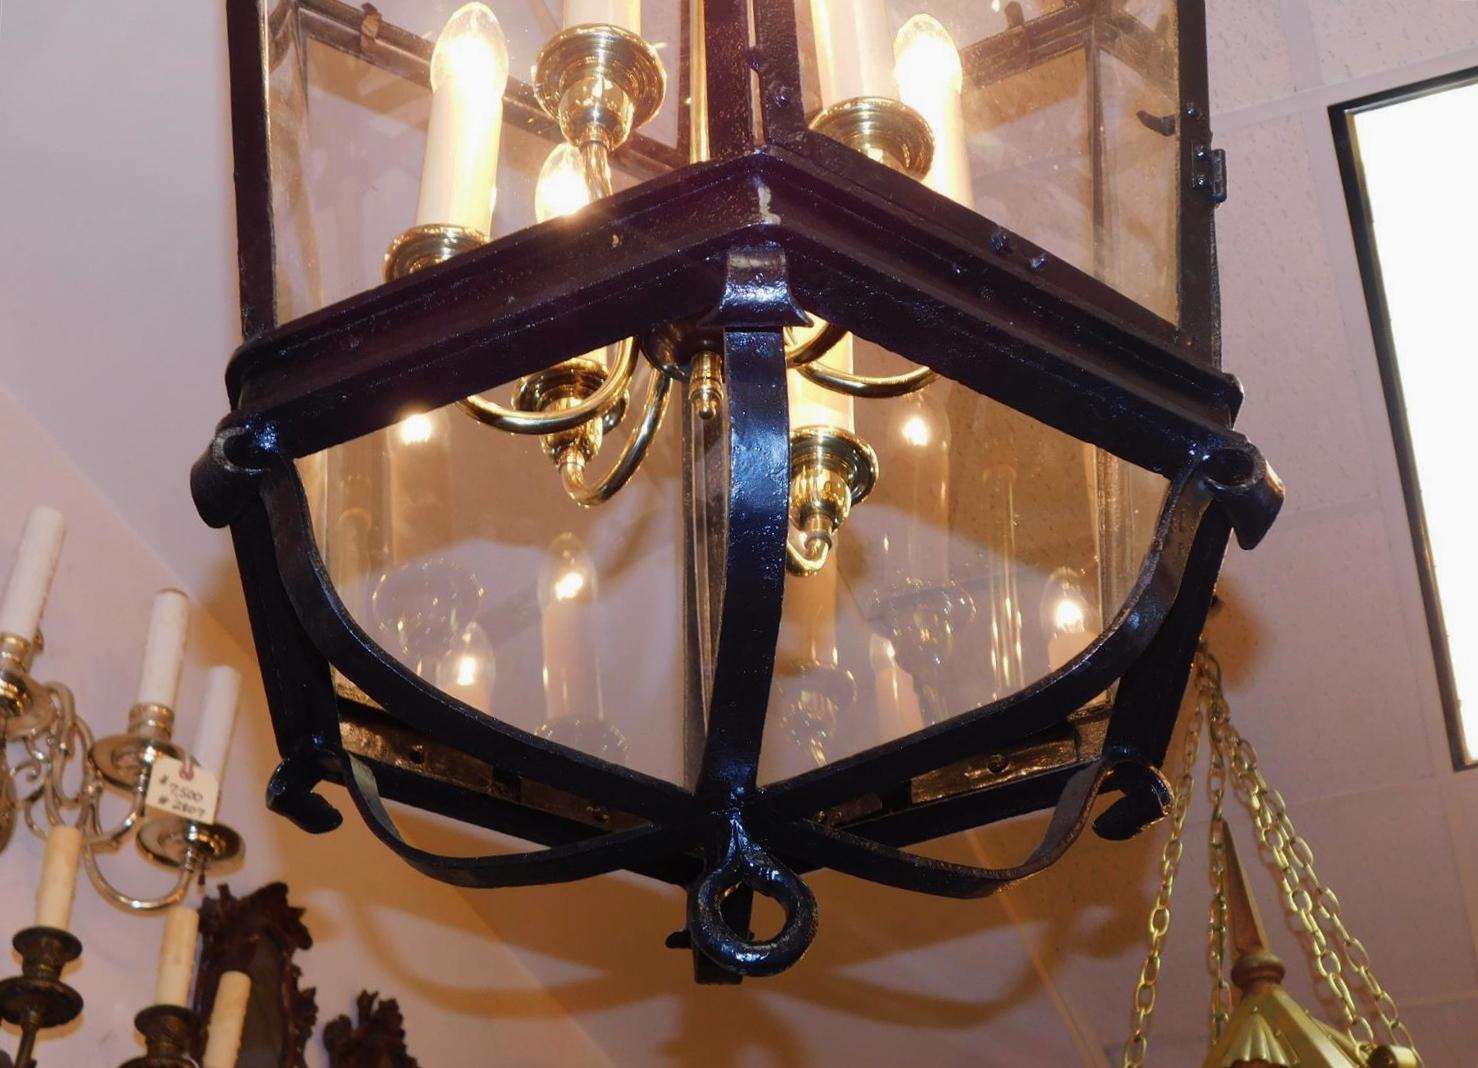 Pair of American Wrought Iron & Brass Dome Shaped Hanging Lanterns, Circa 1820 For Sale 2